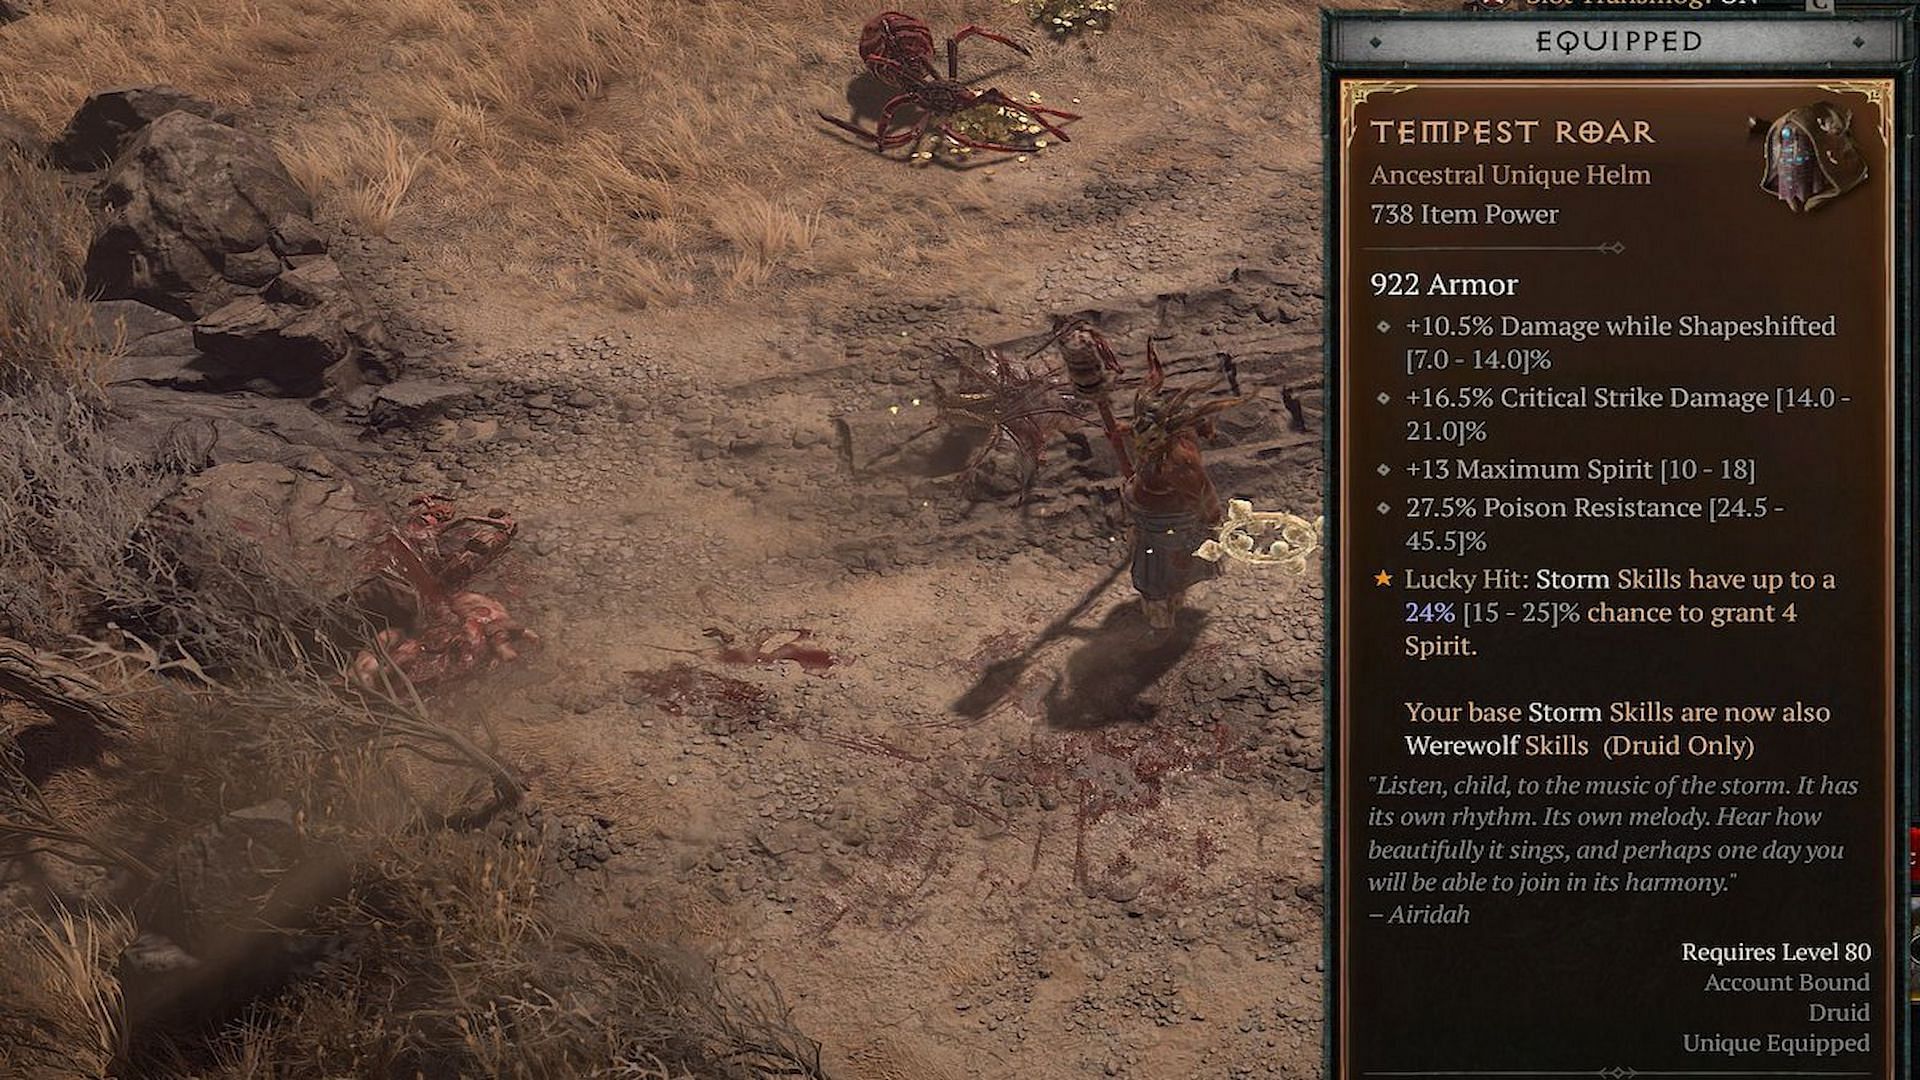 All items in Diablo 4 come with an associated power counter (Image via Blizzard Entertainment)